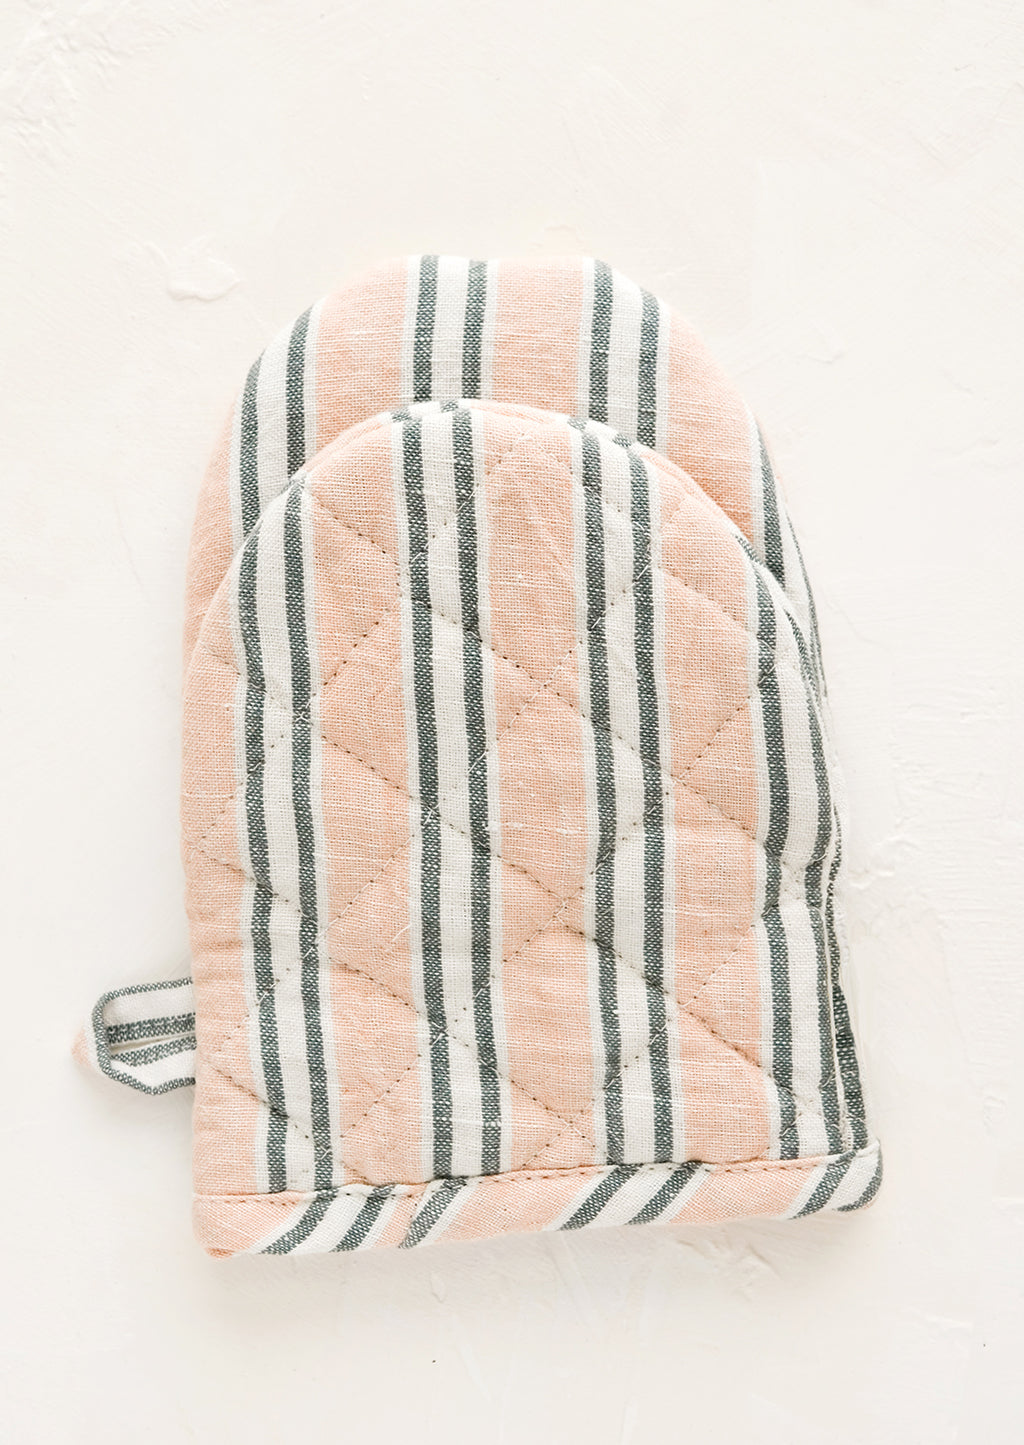 Blush / Indigo: A quilted oven mitt made from pink, indigo and white striped linen.